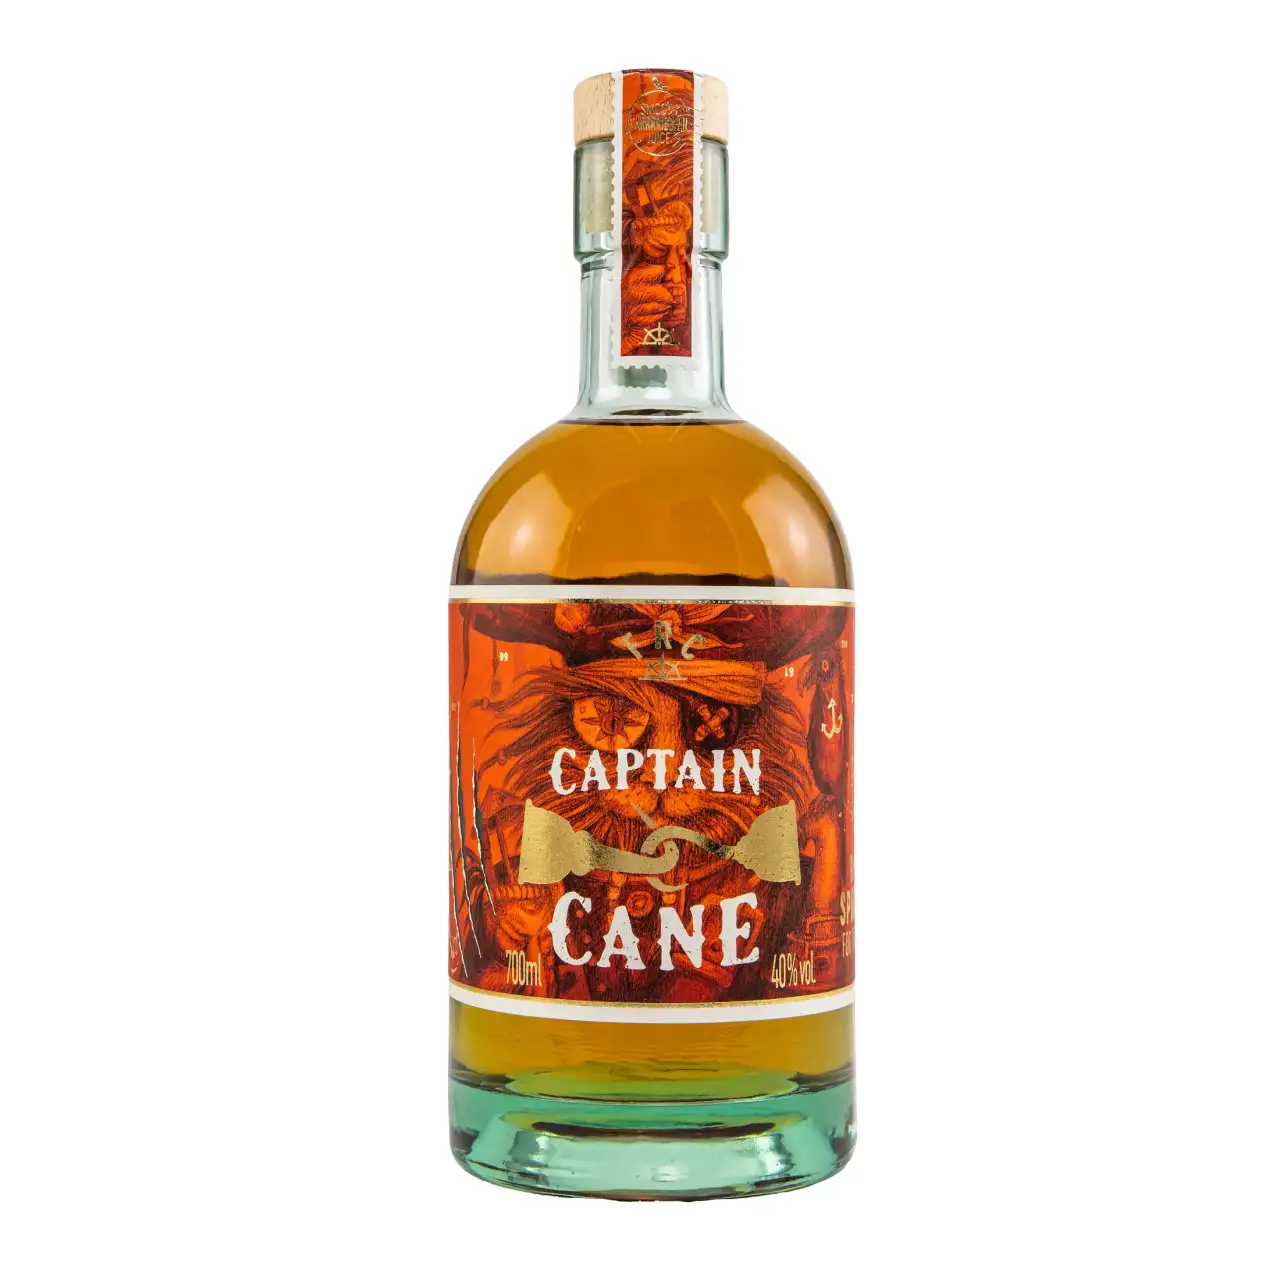 Image of the front of the bottle of the rum FRC Captain Cane